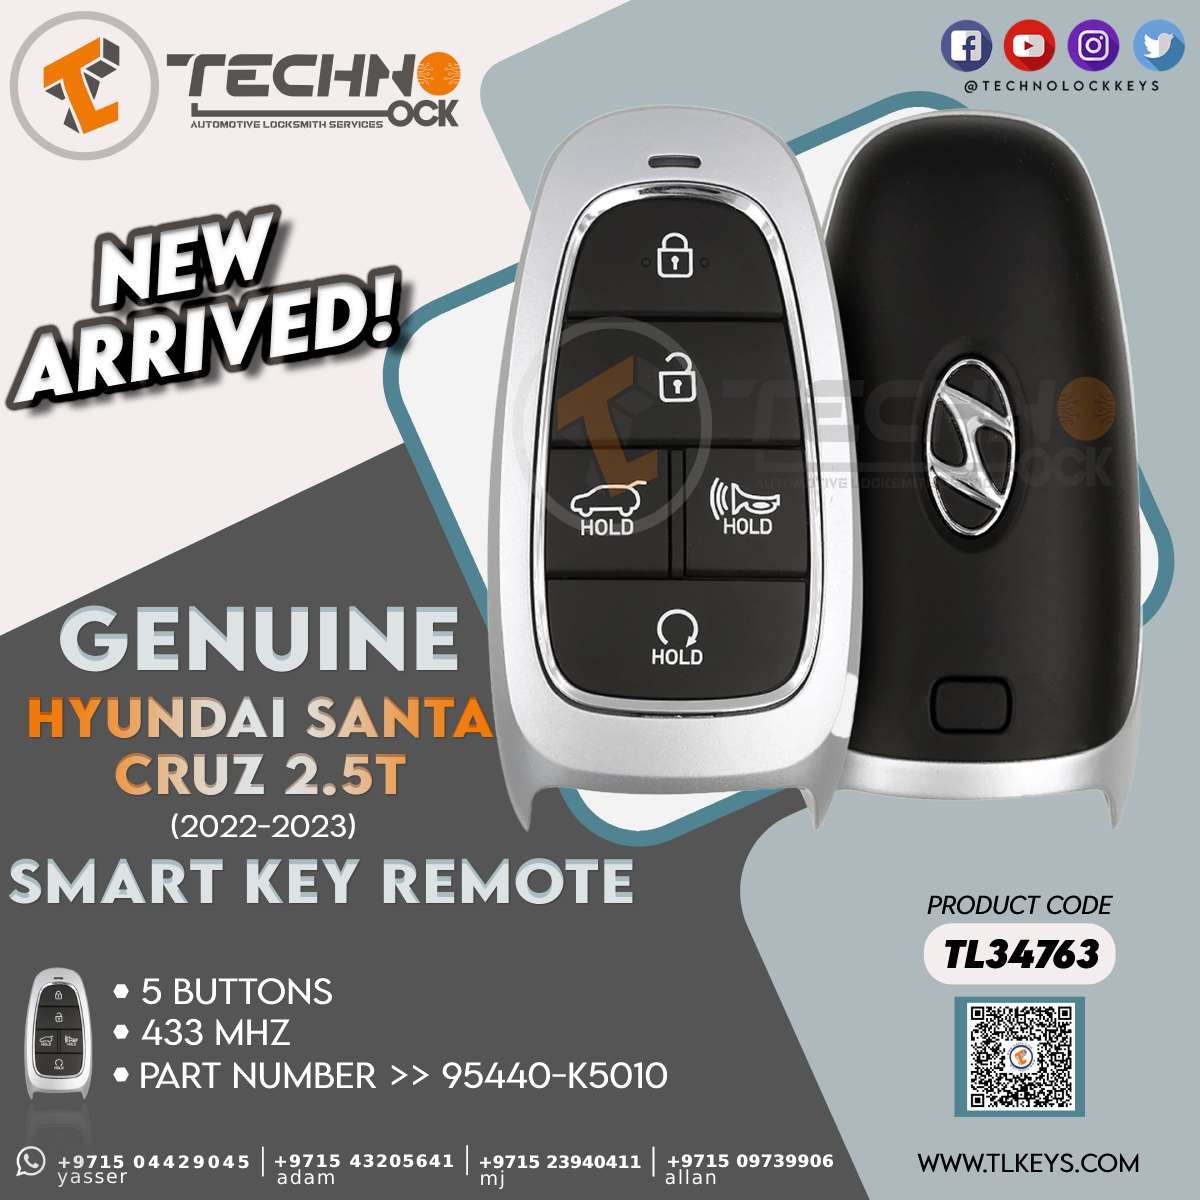 Smart remote with 5 Buttons Lock, Unlock, Panic, Trunk, and AutoStart